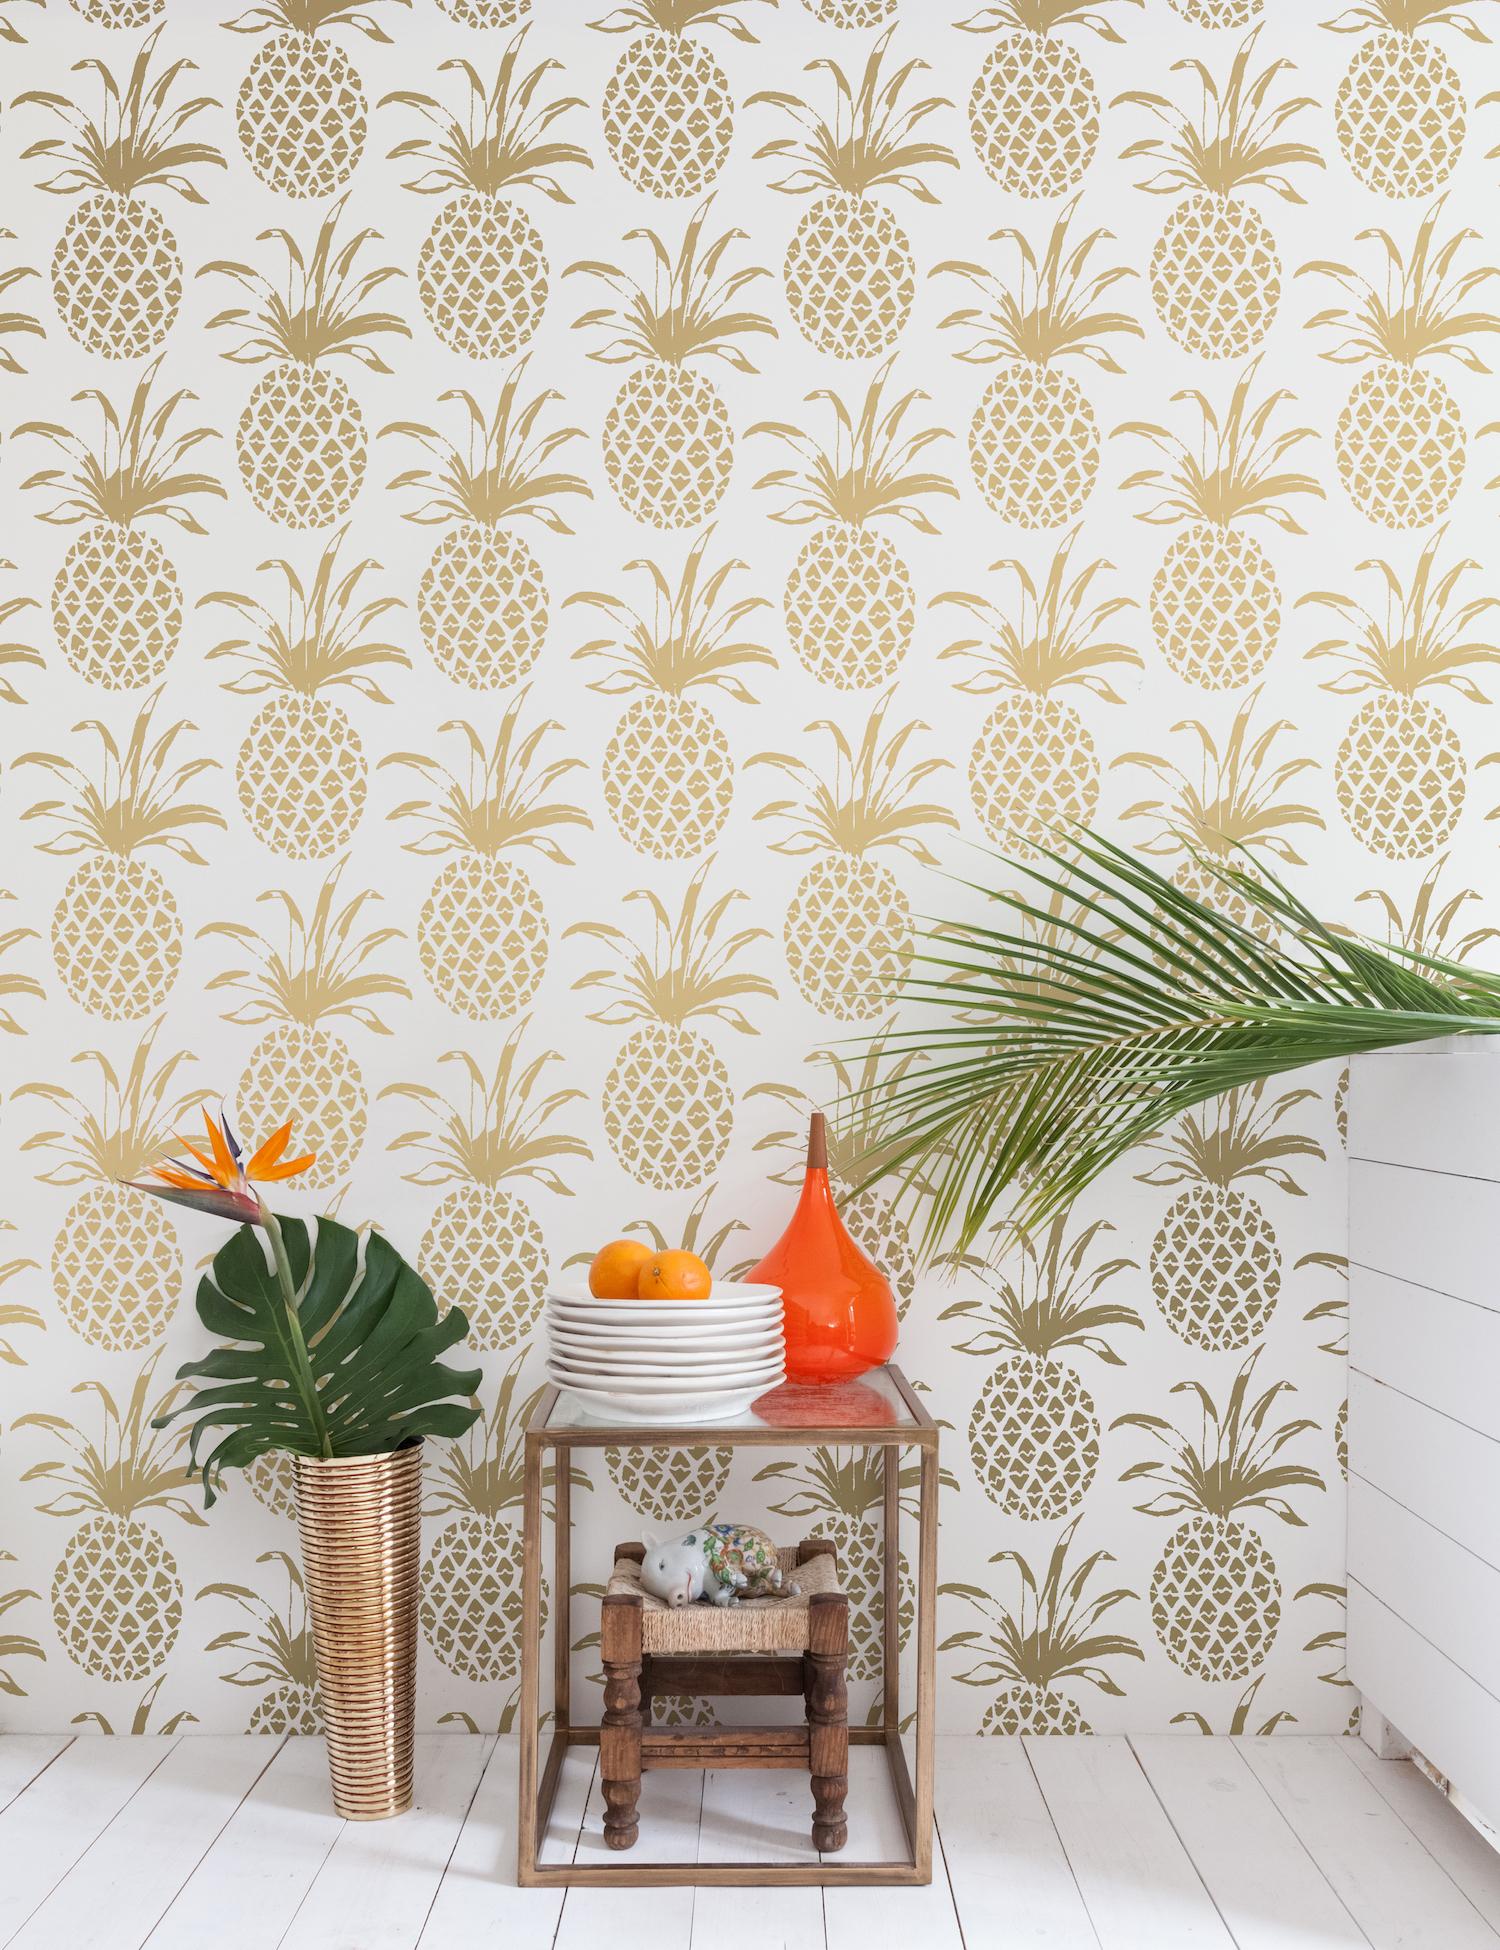 There's no better way to say welcome than with our pineapple wallpaper!
 
Samples are available for $18 including US shipping, please message us to purchase.  

Printing: Screen-printed by hand (minimum order and setup fees apply).
Material: